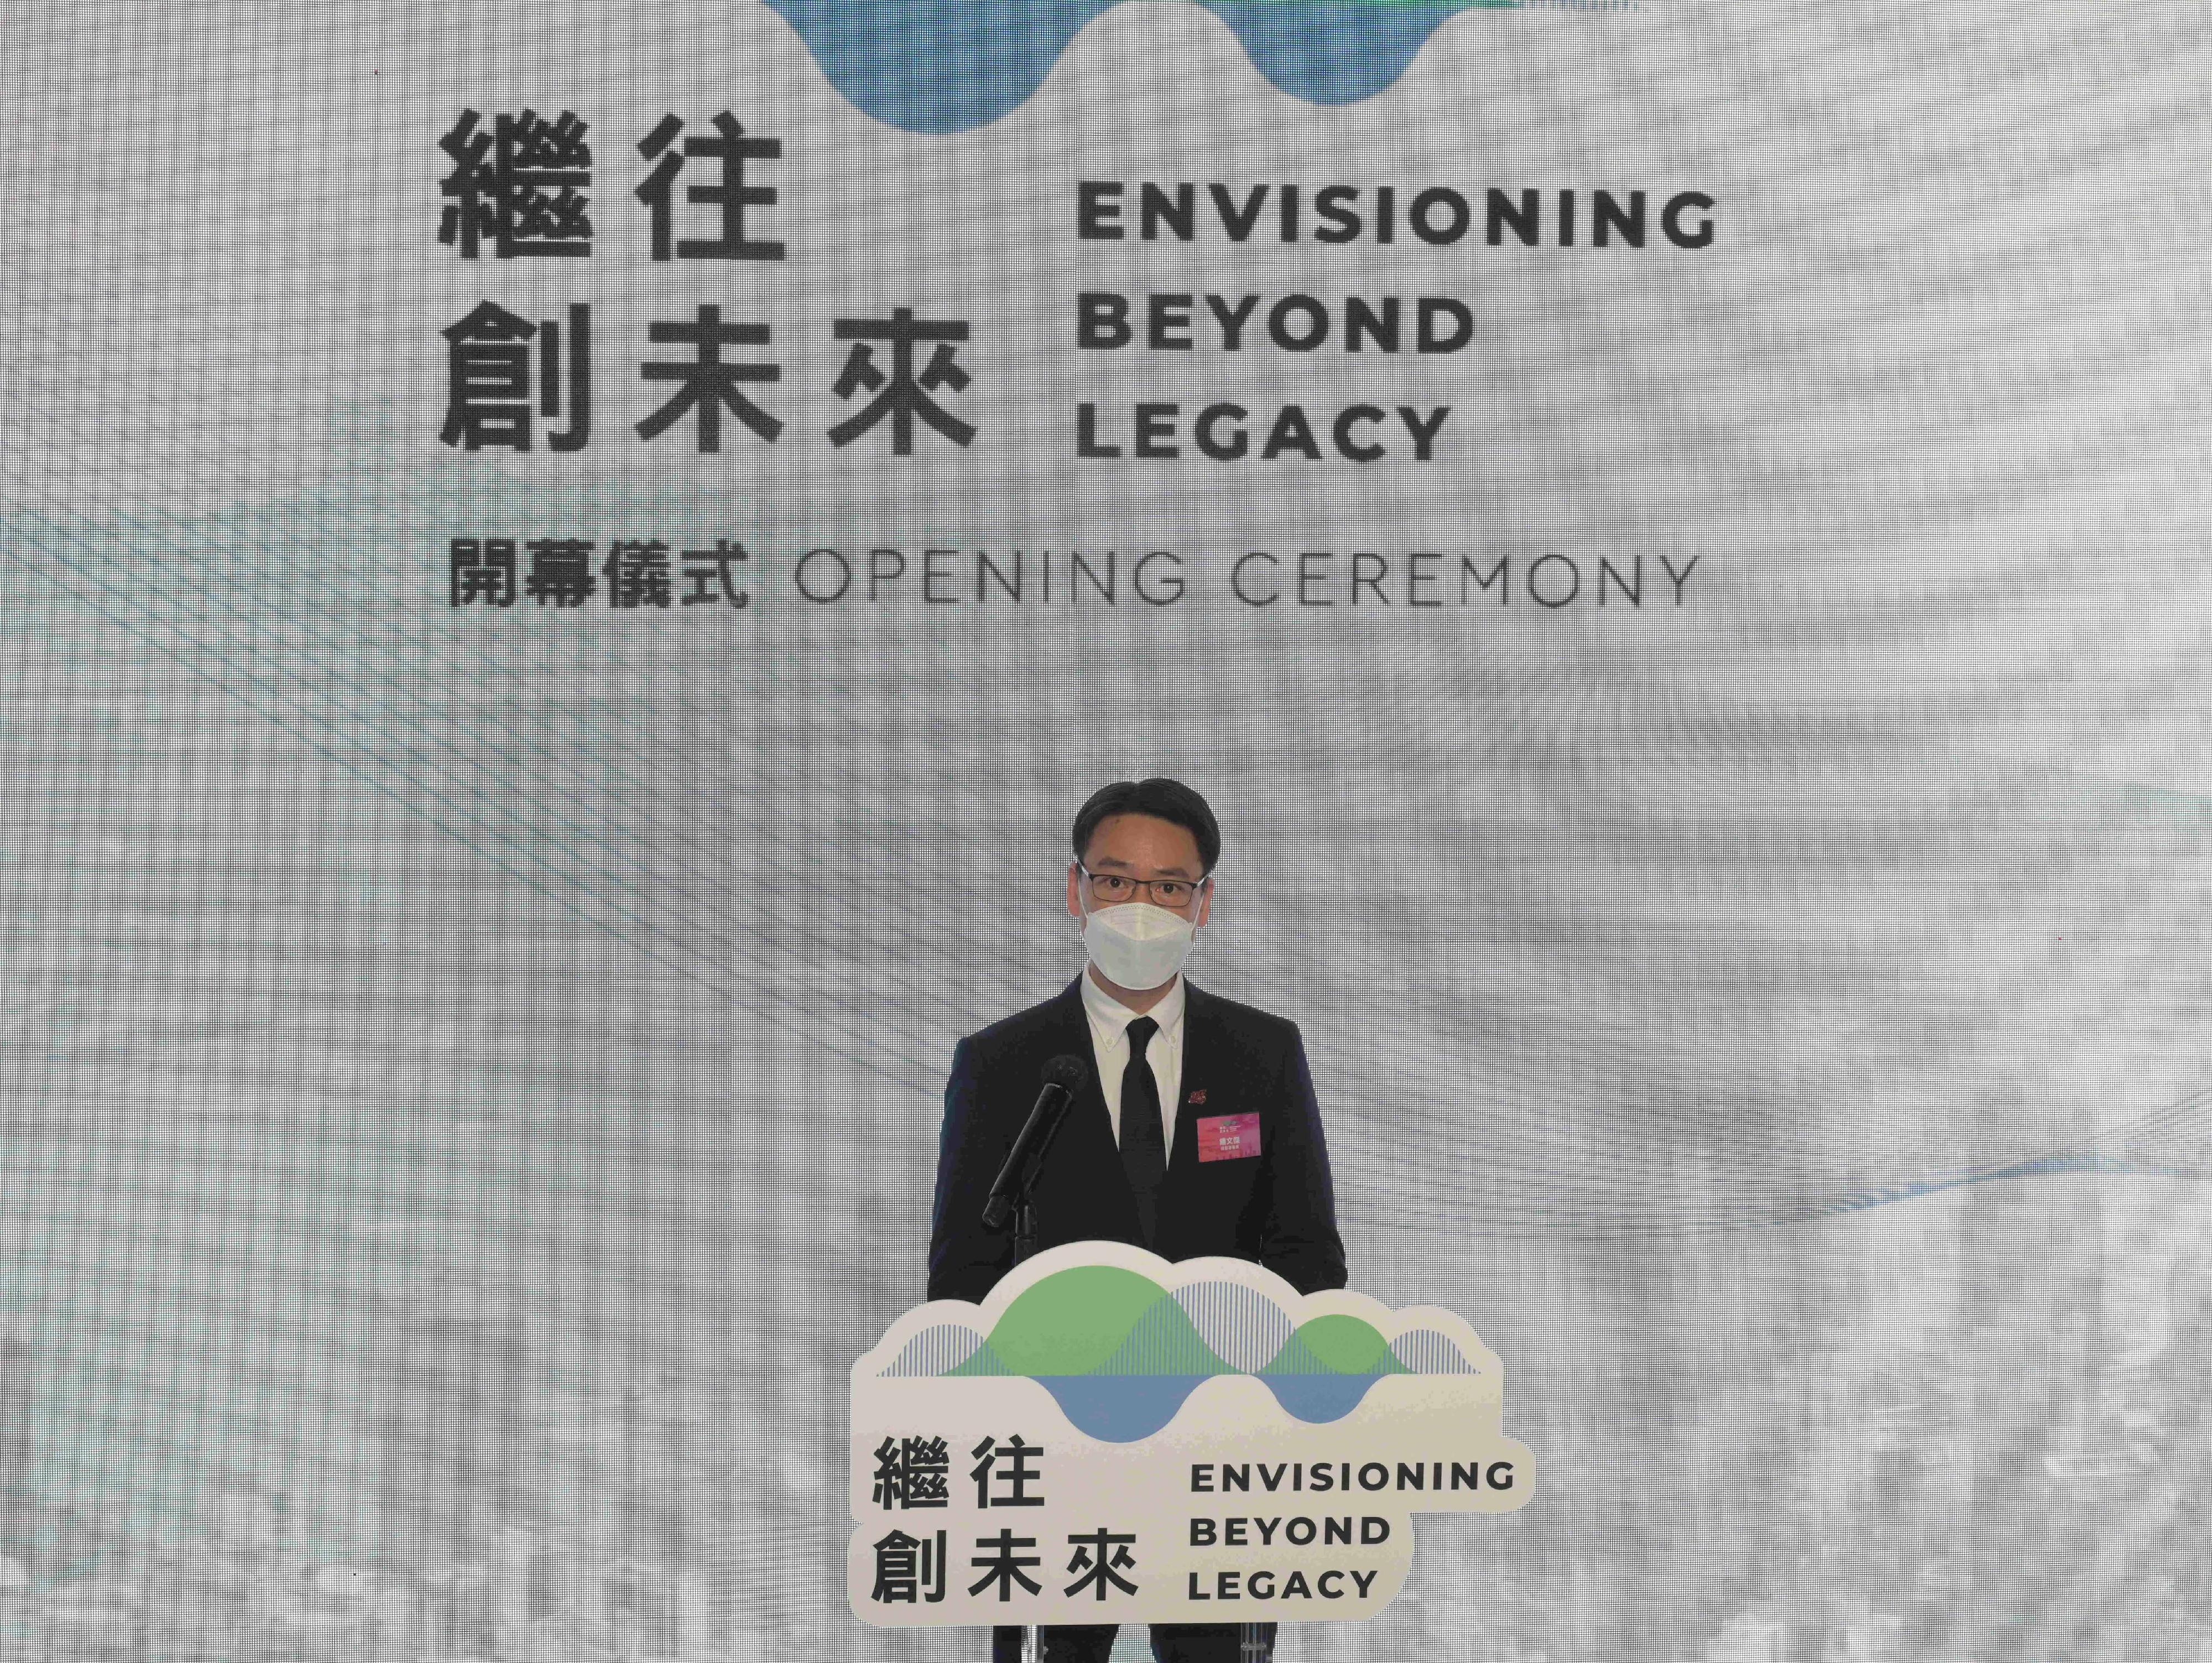 To celebrate the 25th anniversary of the establishment of the Hong Kong Special Administrative Region, the exhibition "Envisioning Beyond Legacy", jointly presented by the Development Bureau and the Planning Department, will be open to the public from tomorrow (July 6) until November 30 at City Gallery in Central. Photo shows the Director of Planning, Mr Ivan Chung, speaking today (July 5) at the opening ceremony.